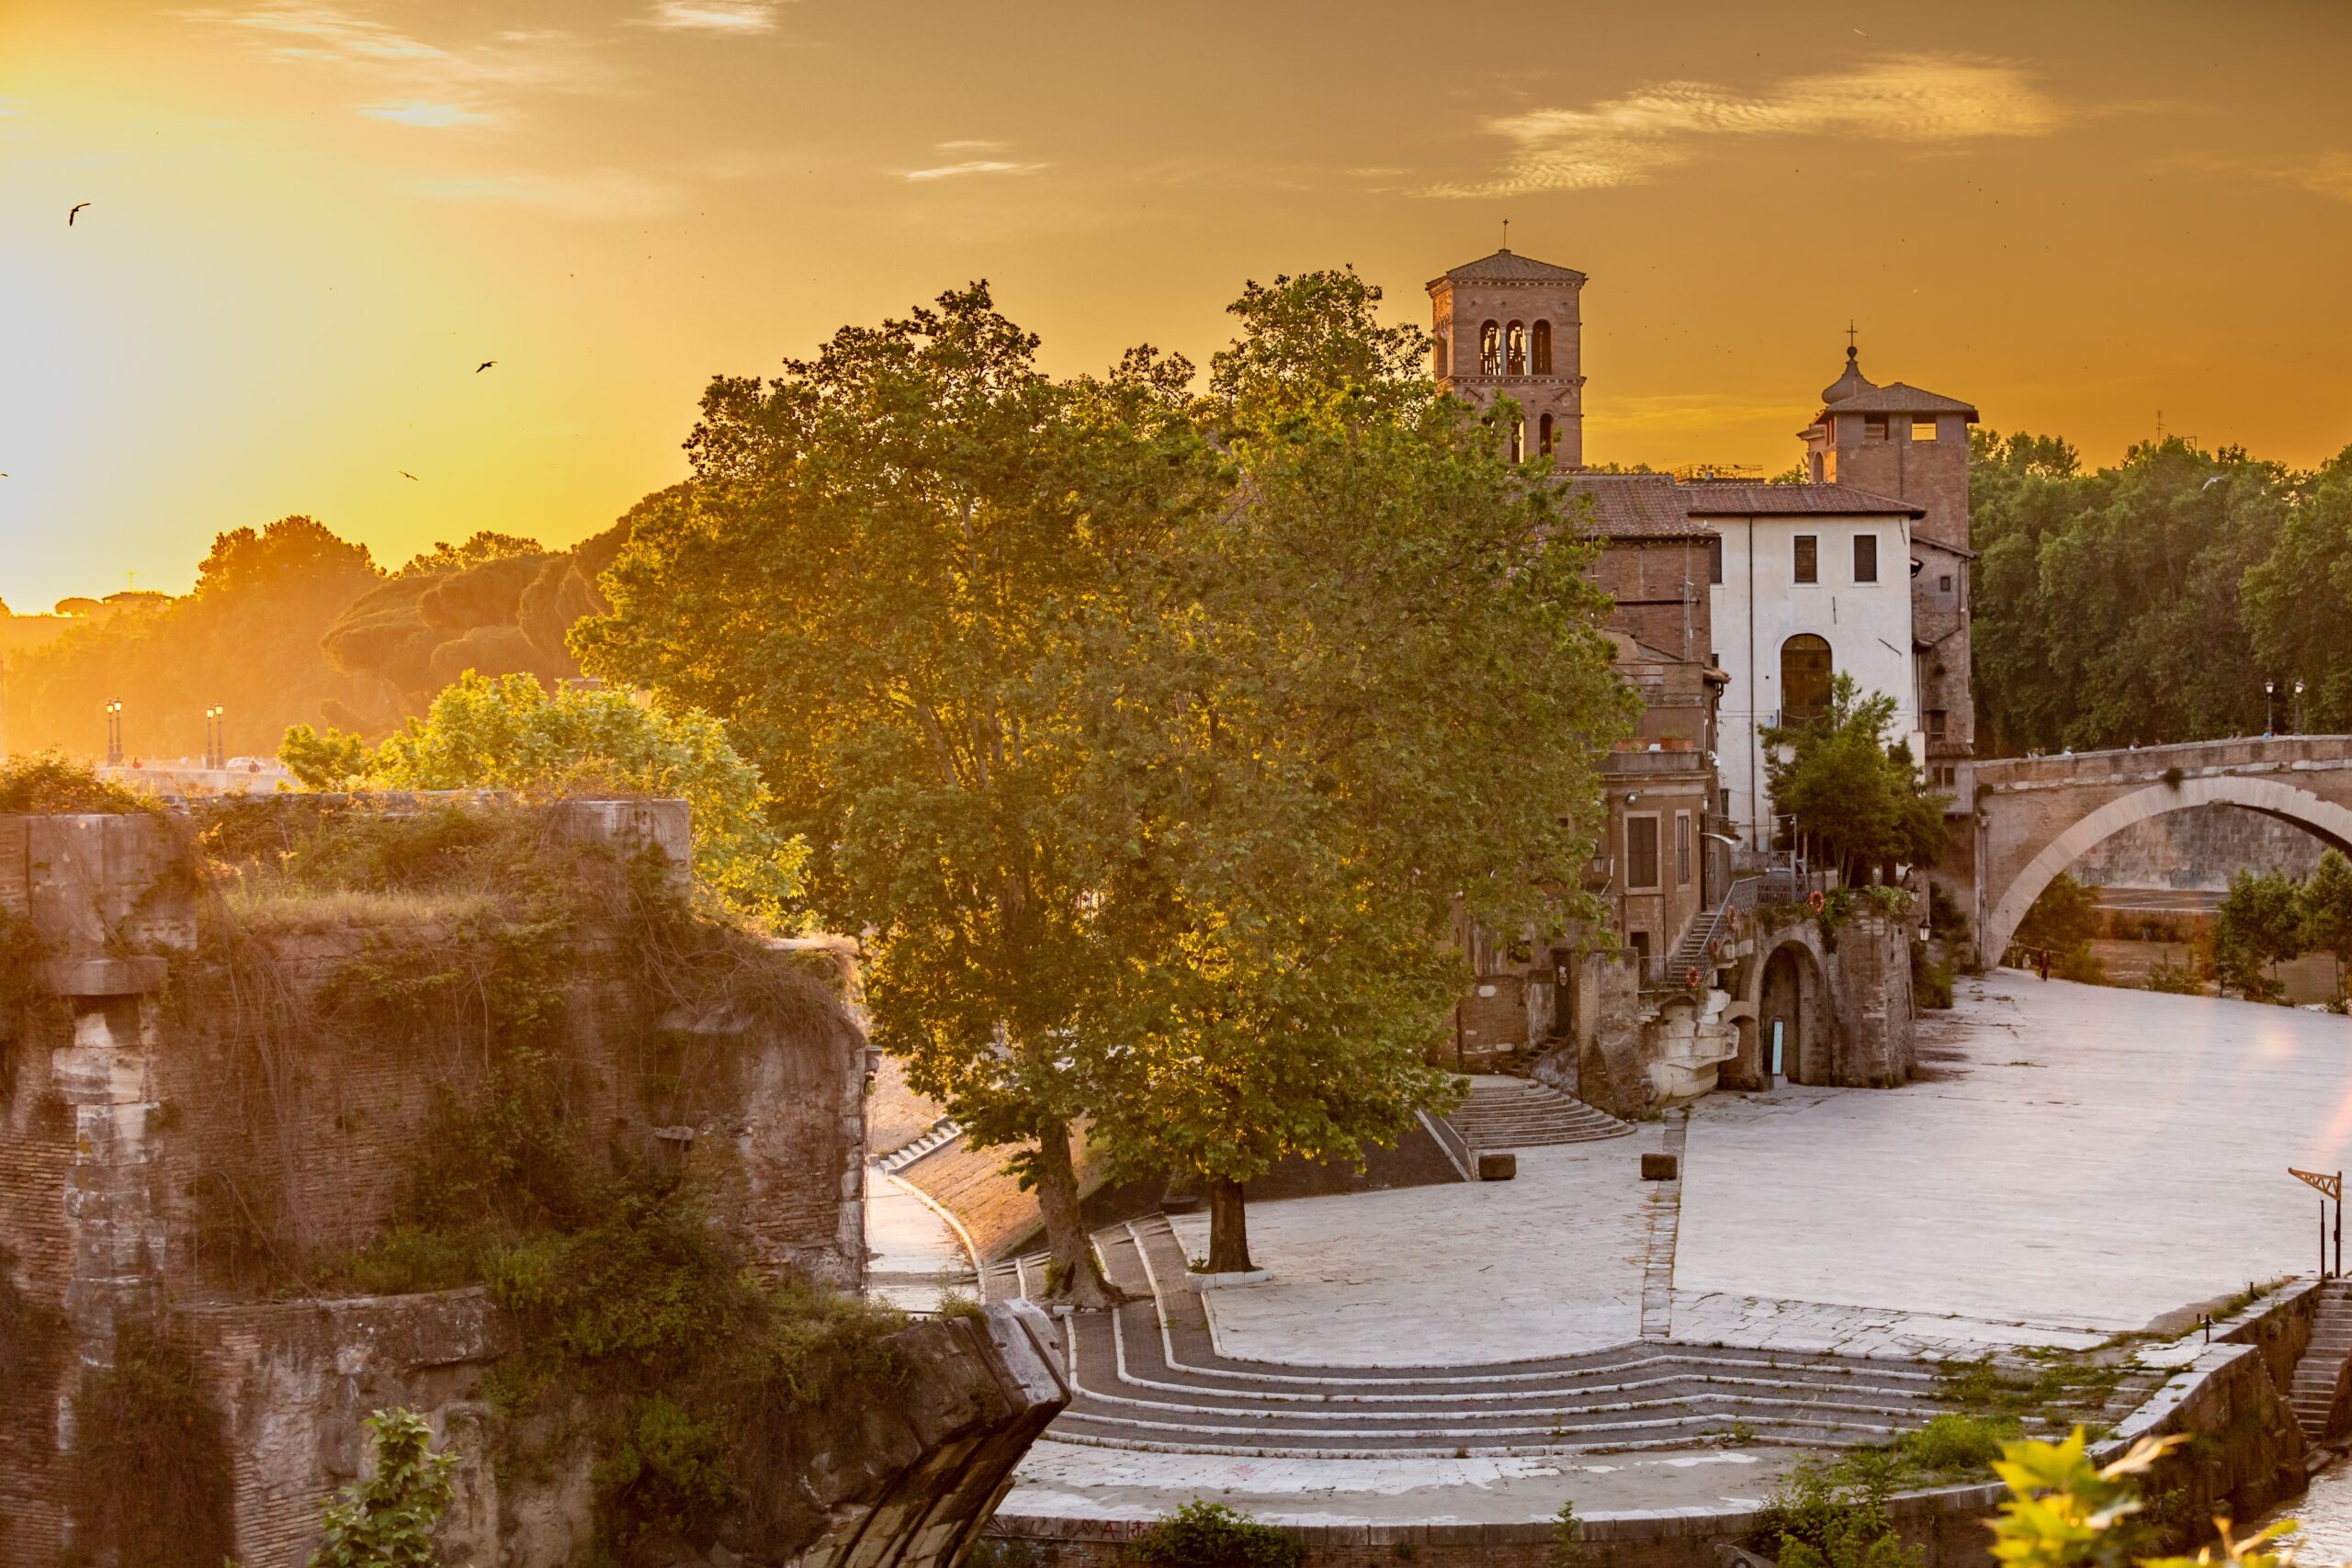 Sunset at the historic and beautiful Tiber Island